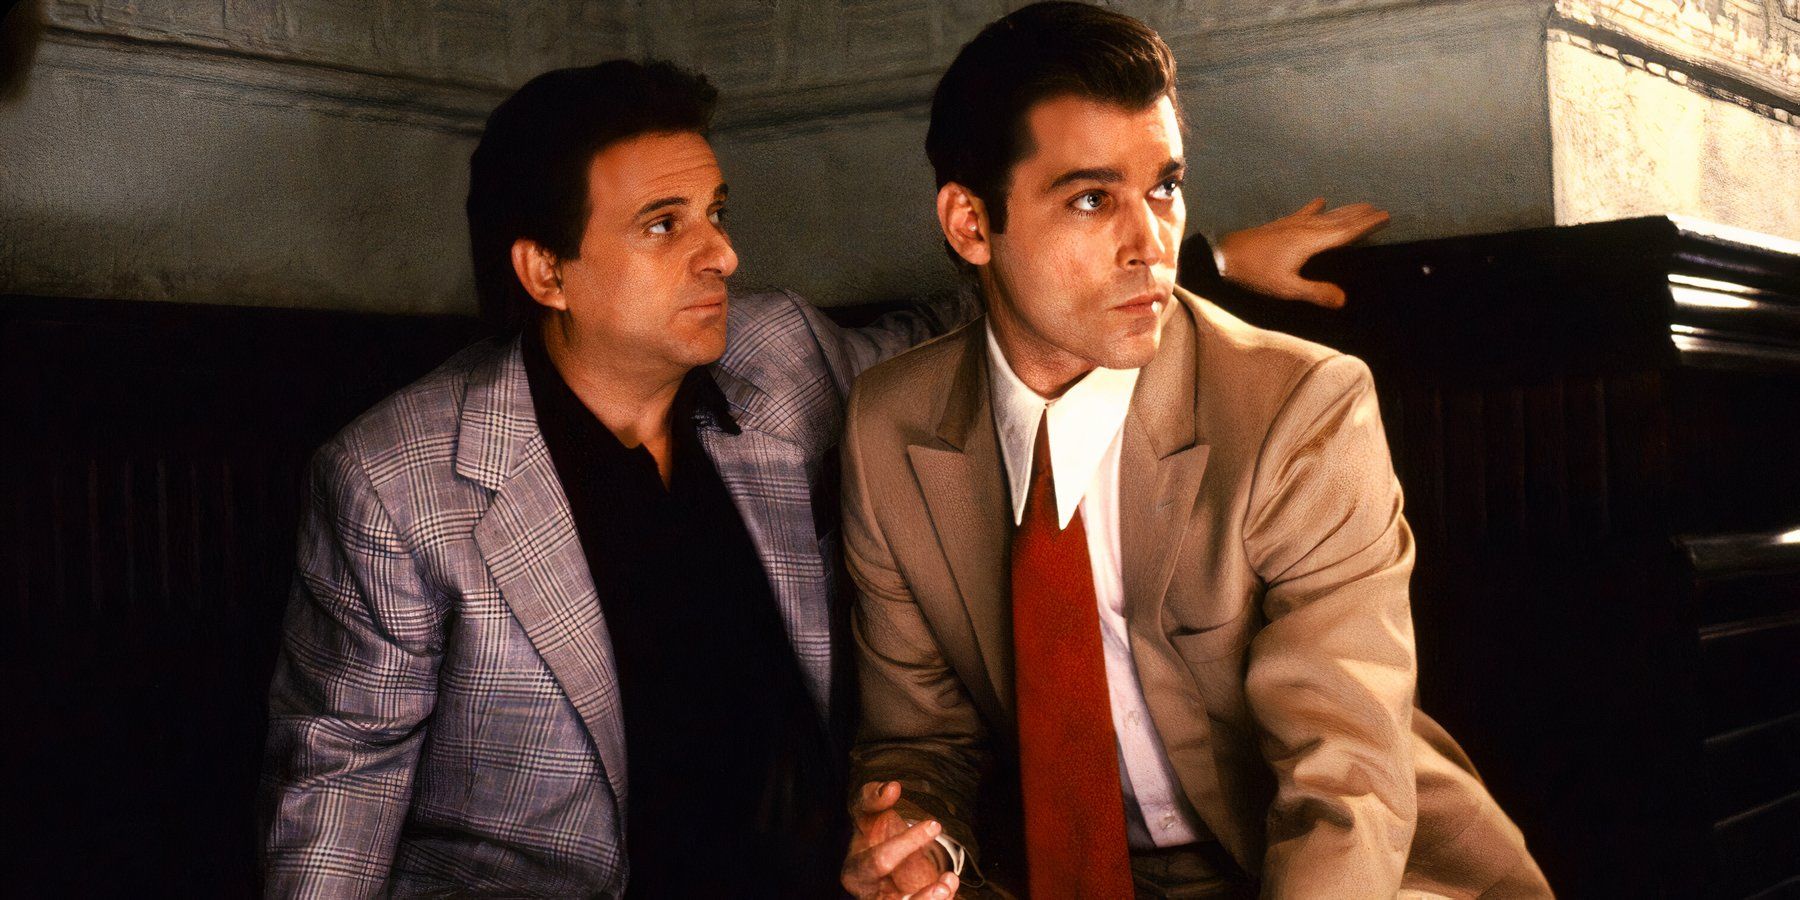 Tommy DeVito and Henry Hill keep an eye out for trouble while conducting shady business in GoodFellas.